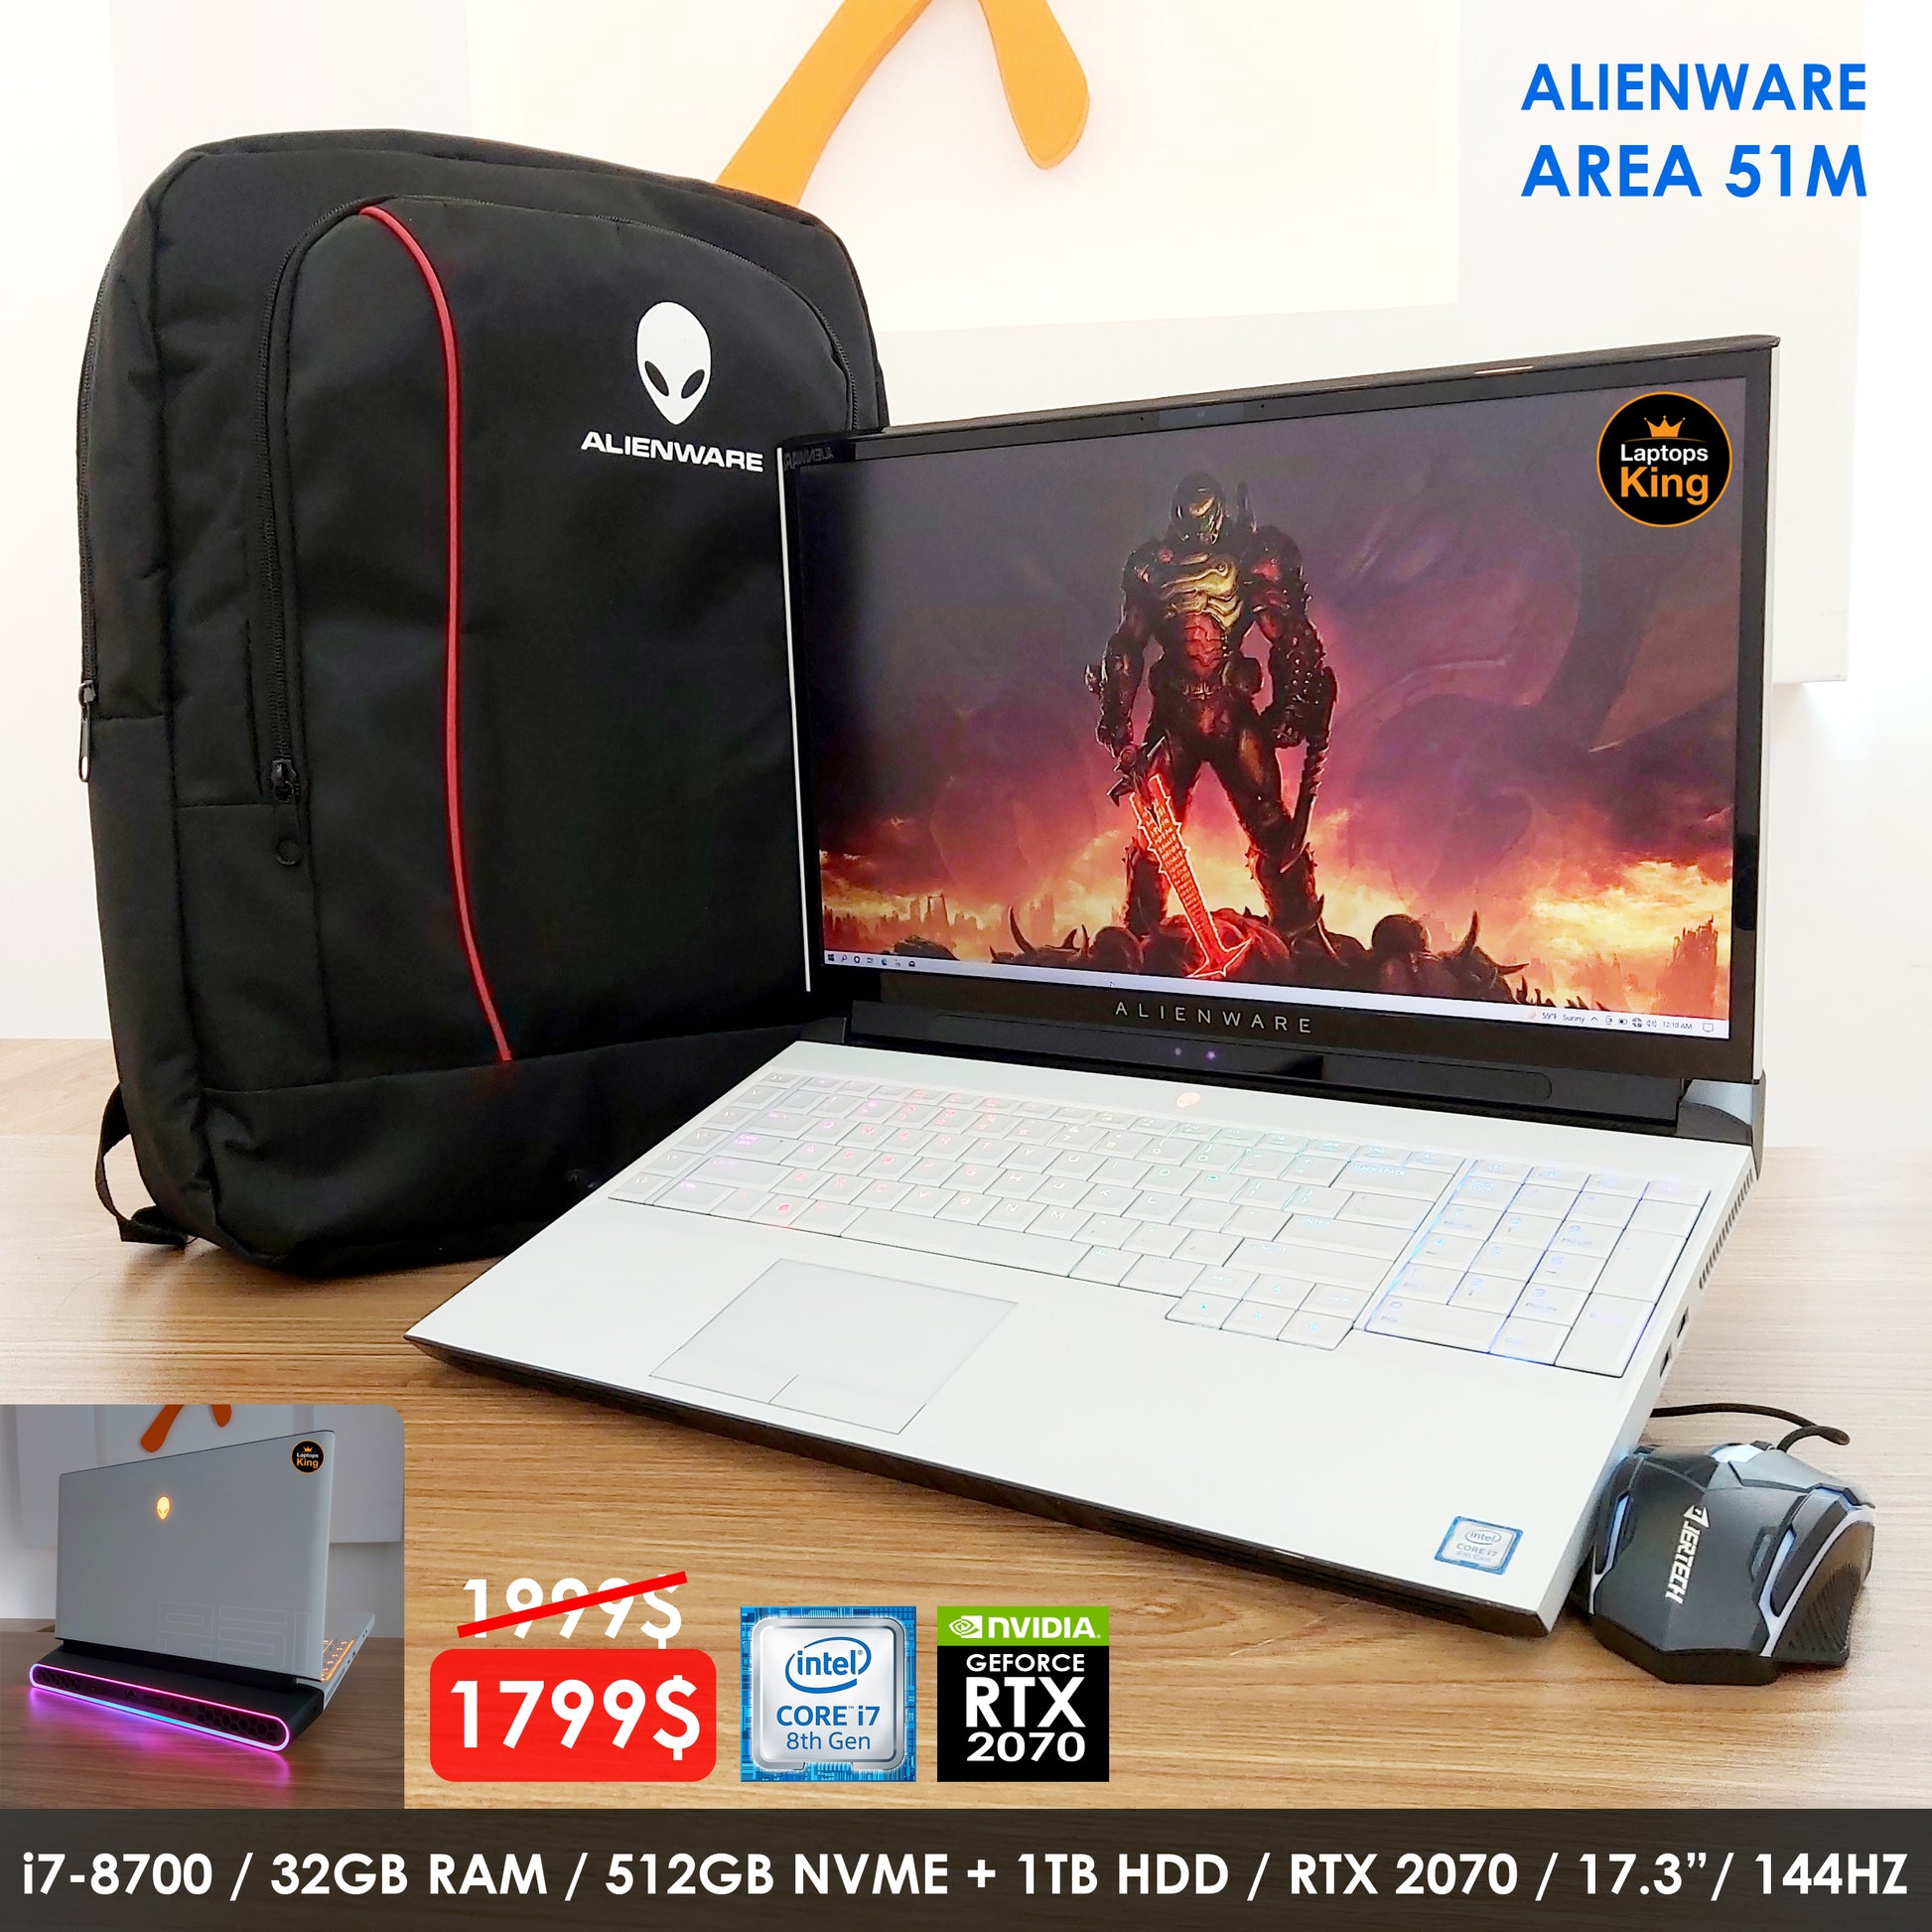 Alienware Area 51m i7-8700 RTX 2070 144Hz Gaming Laptop (New Open Box) Gaming laptop, Graphic Design laptop, best laptop for gaming, Best laptop for graphic design, computer for sale Lebanon, laptop for video editing in Lebanon, laptop for sale Lebanon, Best graphic design laptop,	Best video editing laptop, Best programming laptop, laptop for sale in Lebanon, laptops for sale in Lebanon, laptop for sale in Lebanon, buy computer Lebanon, buy laptop Lebanon.